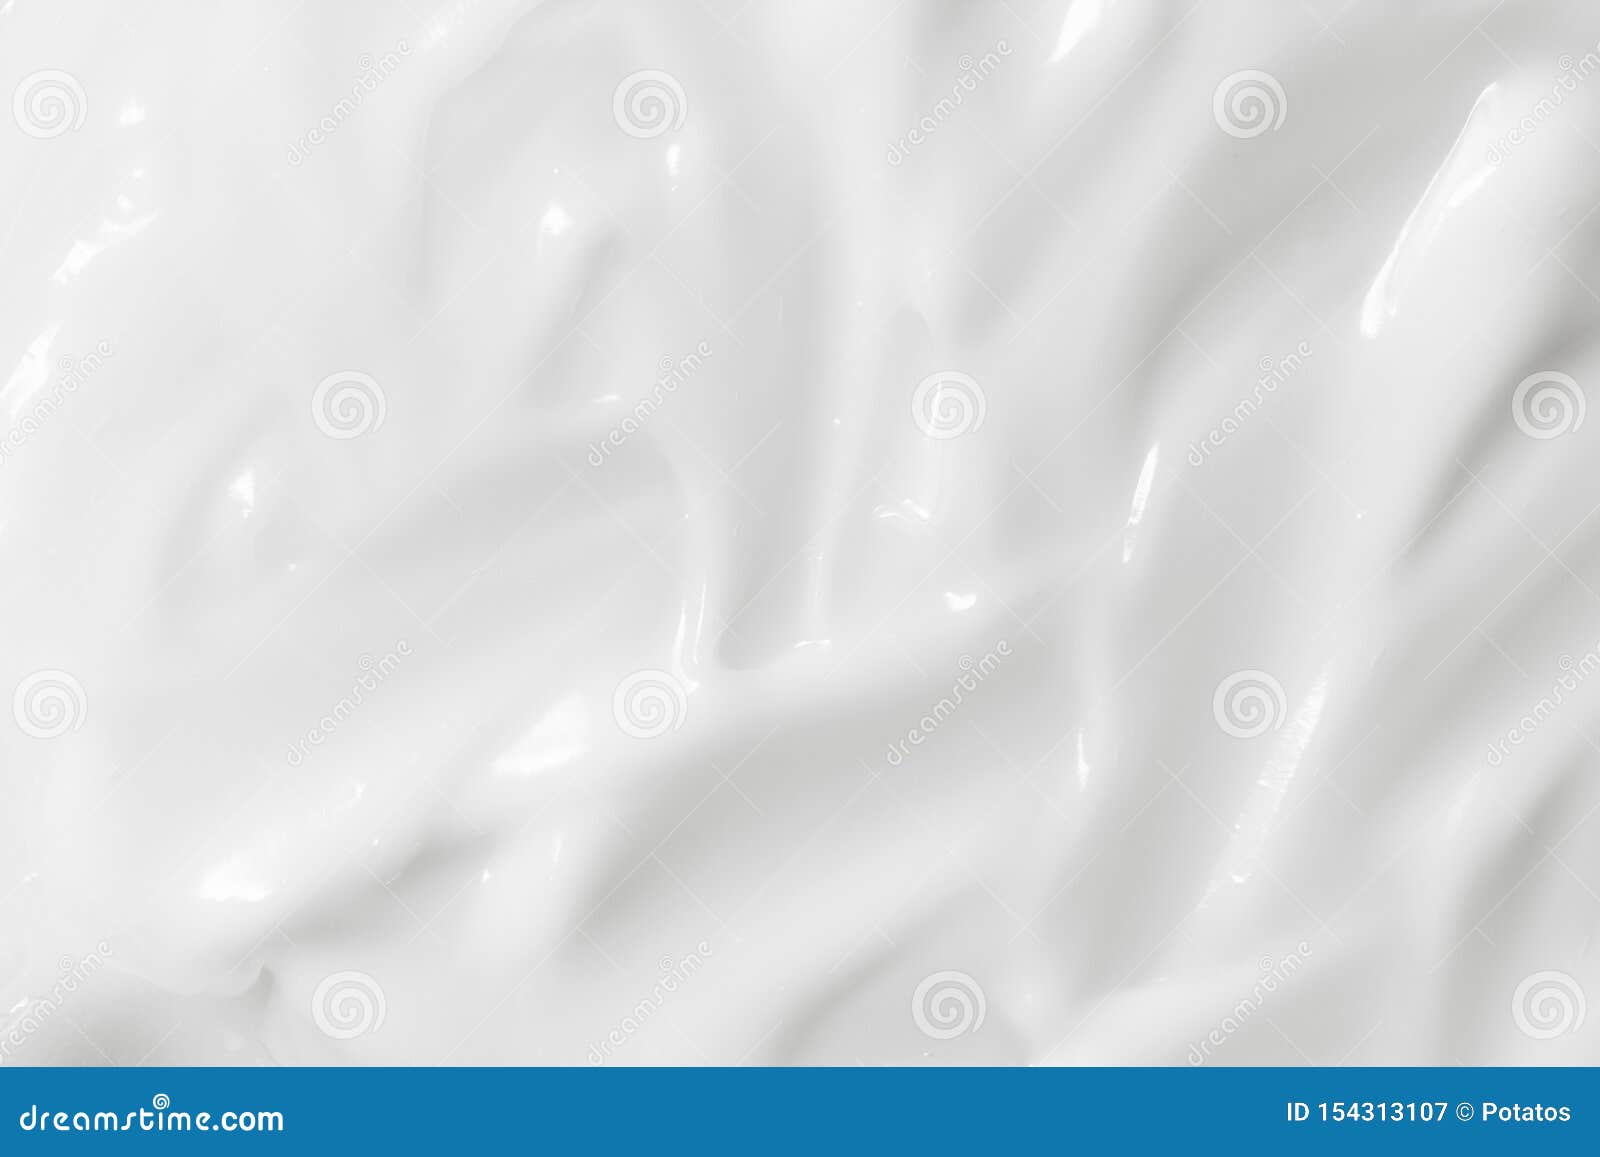 white cosmetic cream texture. lotion, skin care product, face moisturizer background